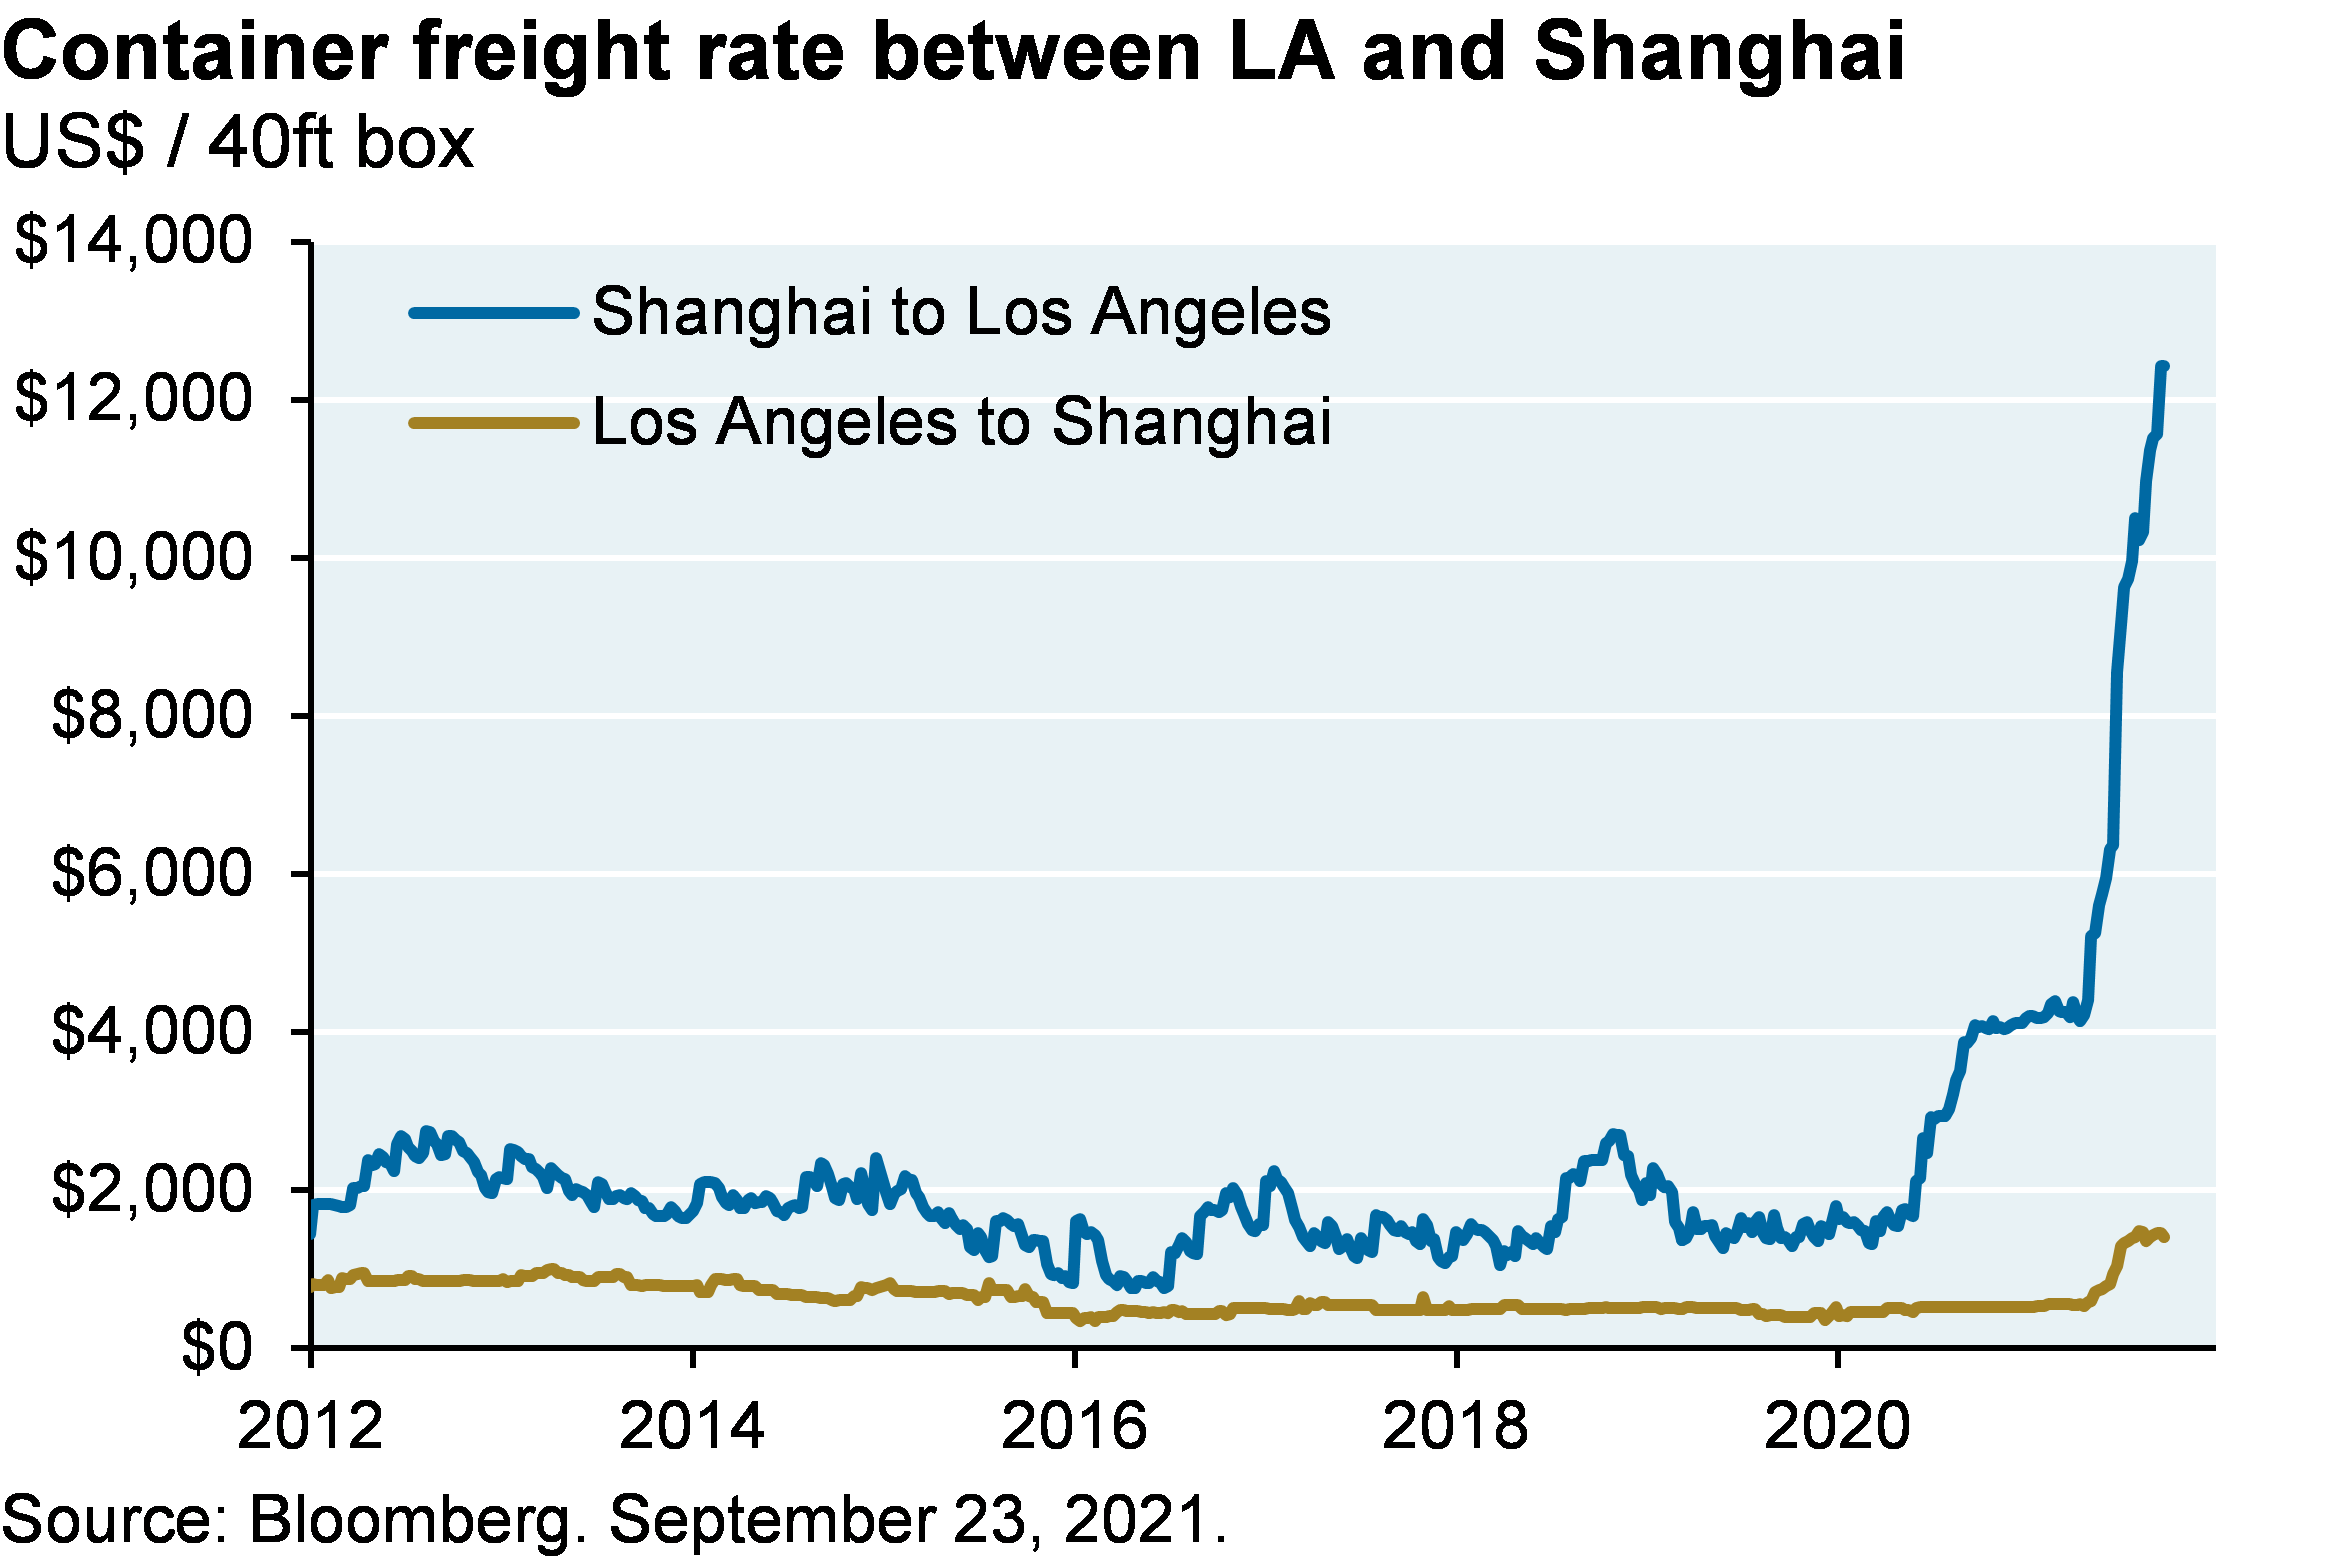 Container freight rate between LA and Shanghai